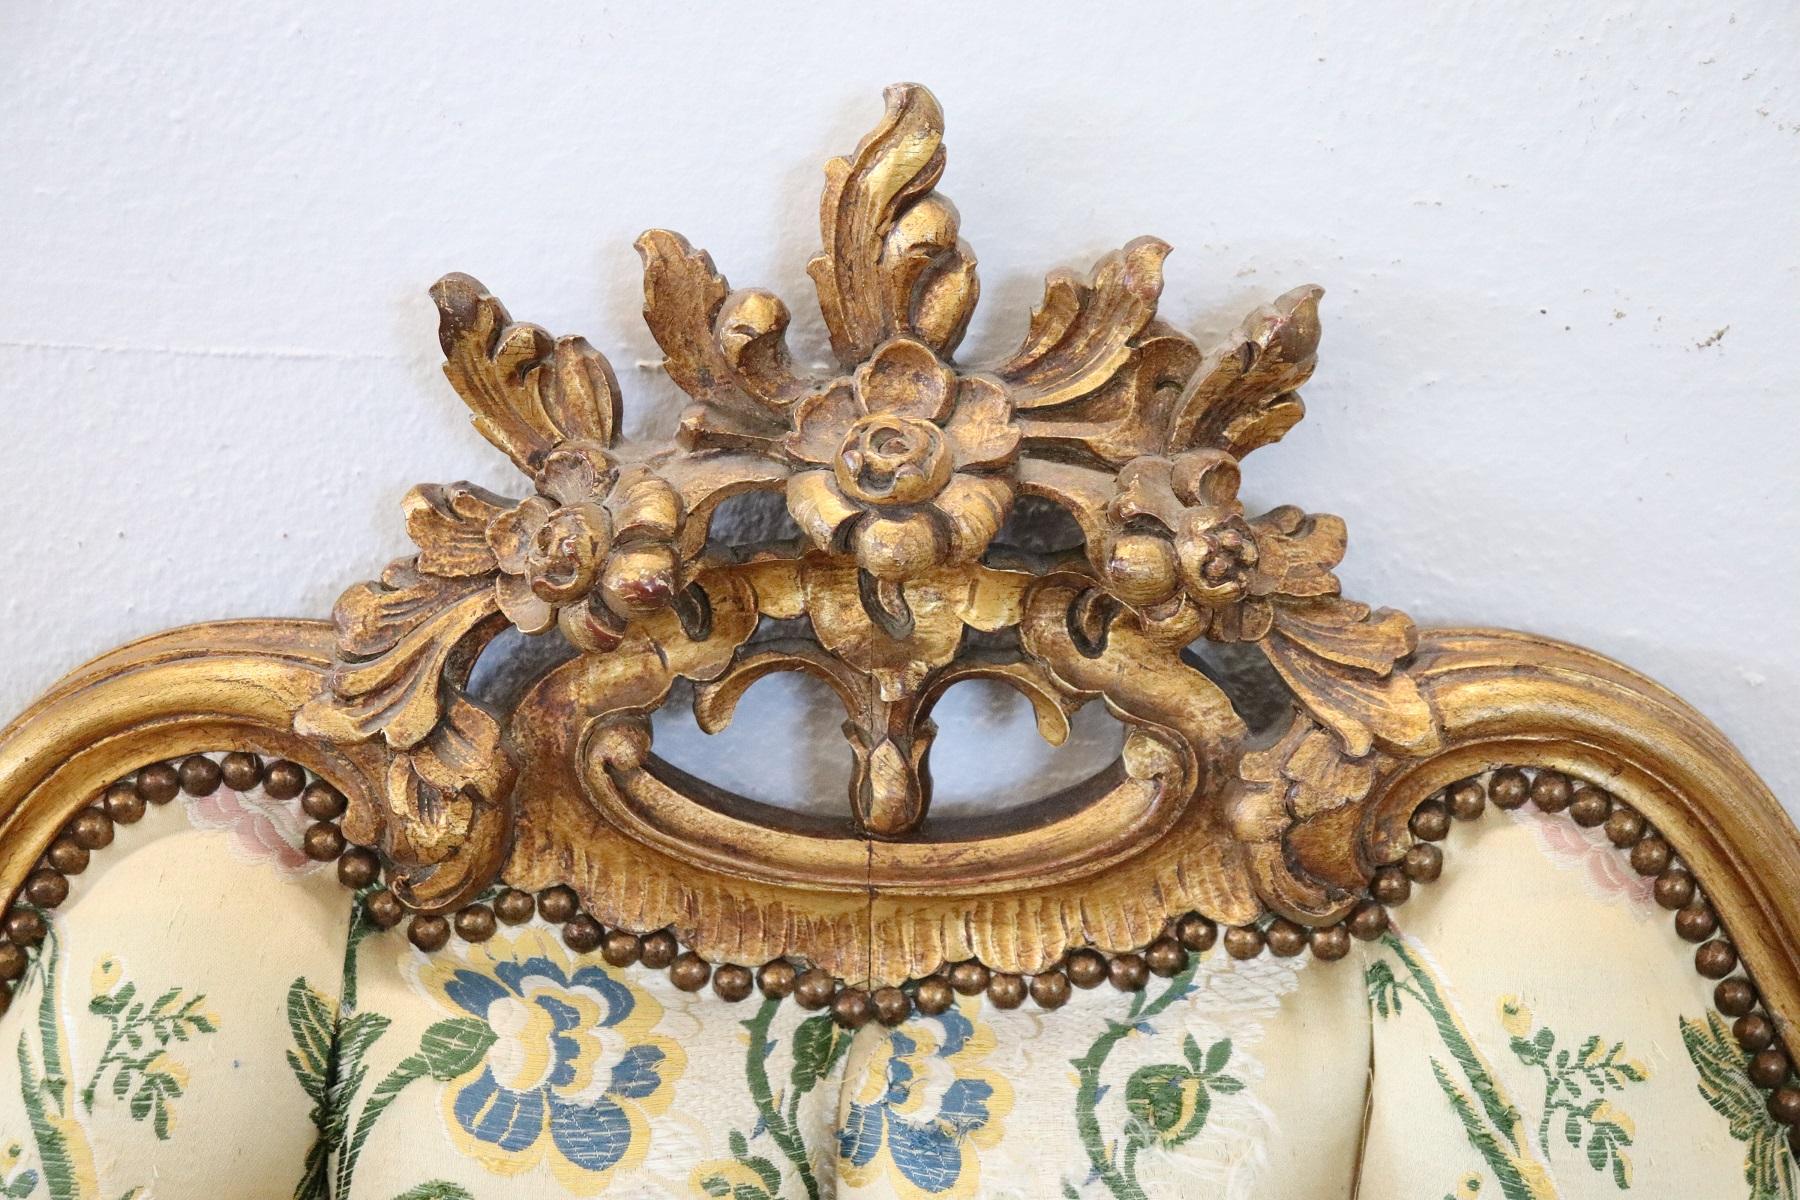 Delicious Italian Baroque style double bed, 1920s. Featuring finely carved wood with curls and swirls enriched with stunning gold leaf gilding. Capitonnè padding with elegant fabric with floral decoration. In good condition, the gold has acquired